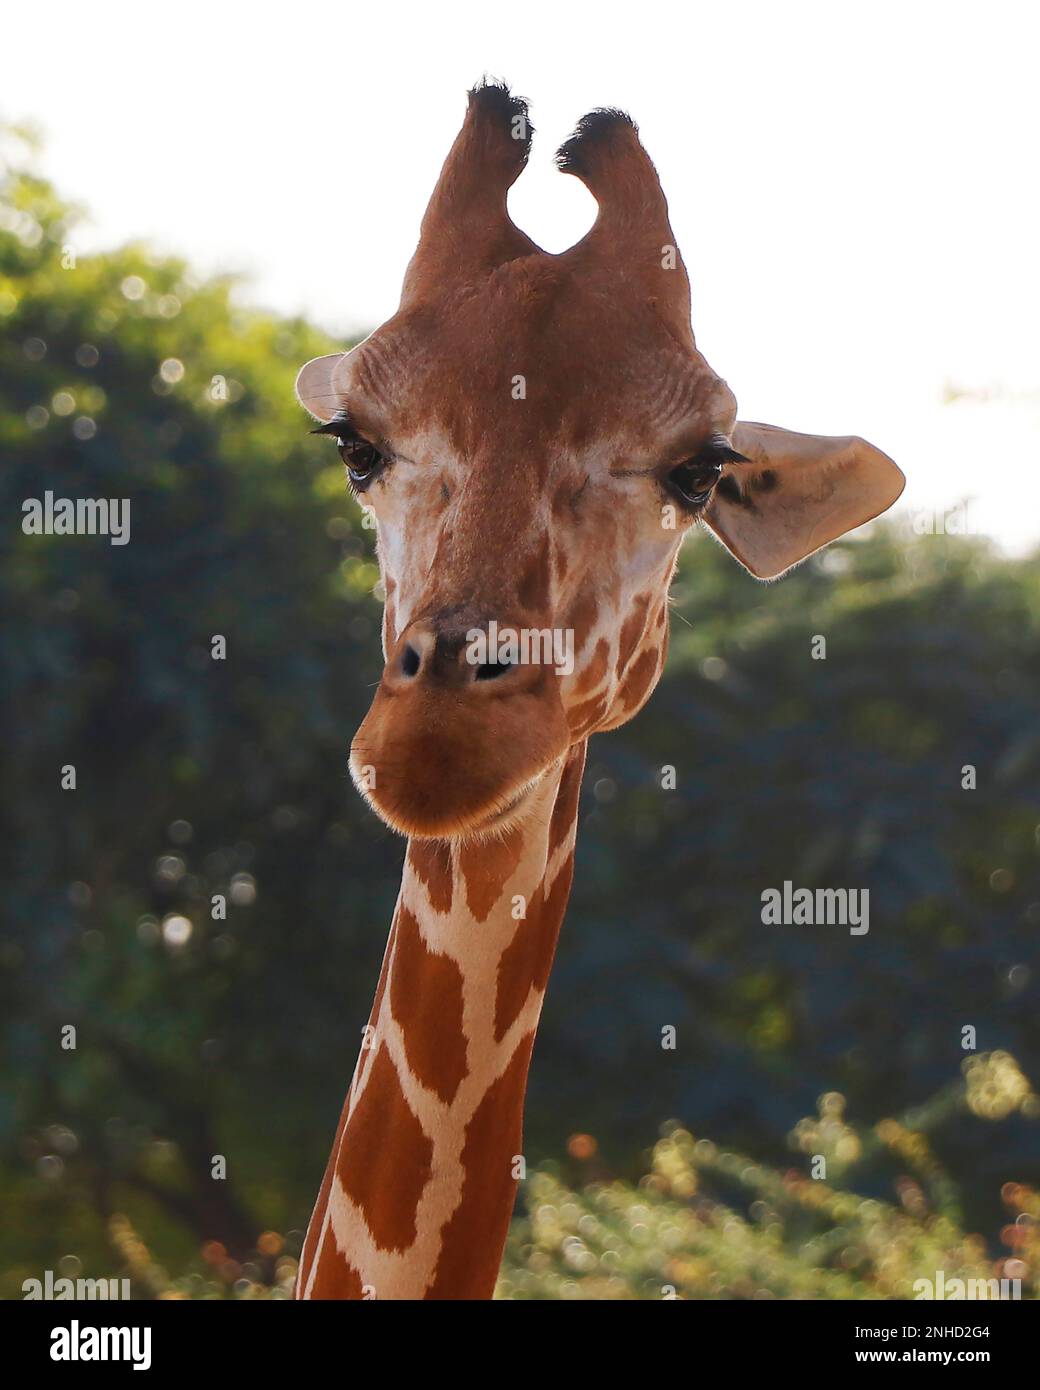 portrait giraffe headshot isolated with nature background in close up Stock Photo